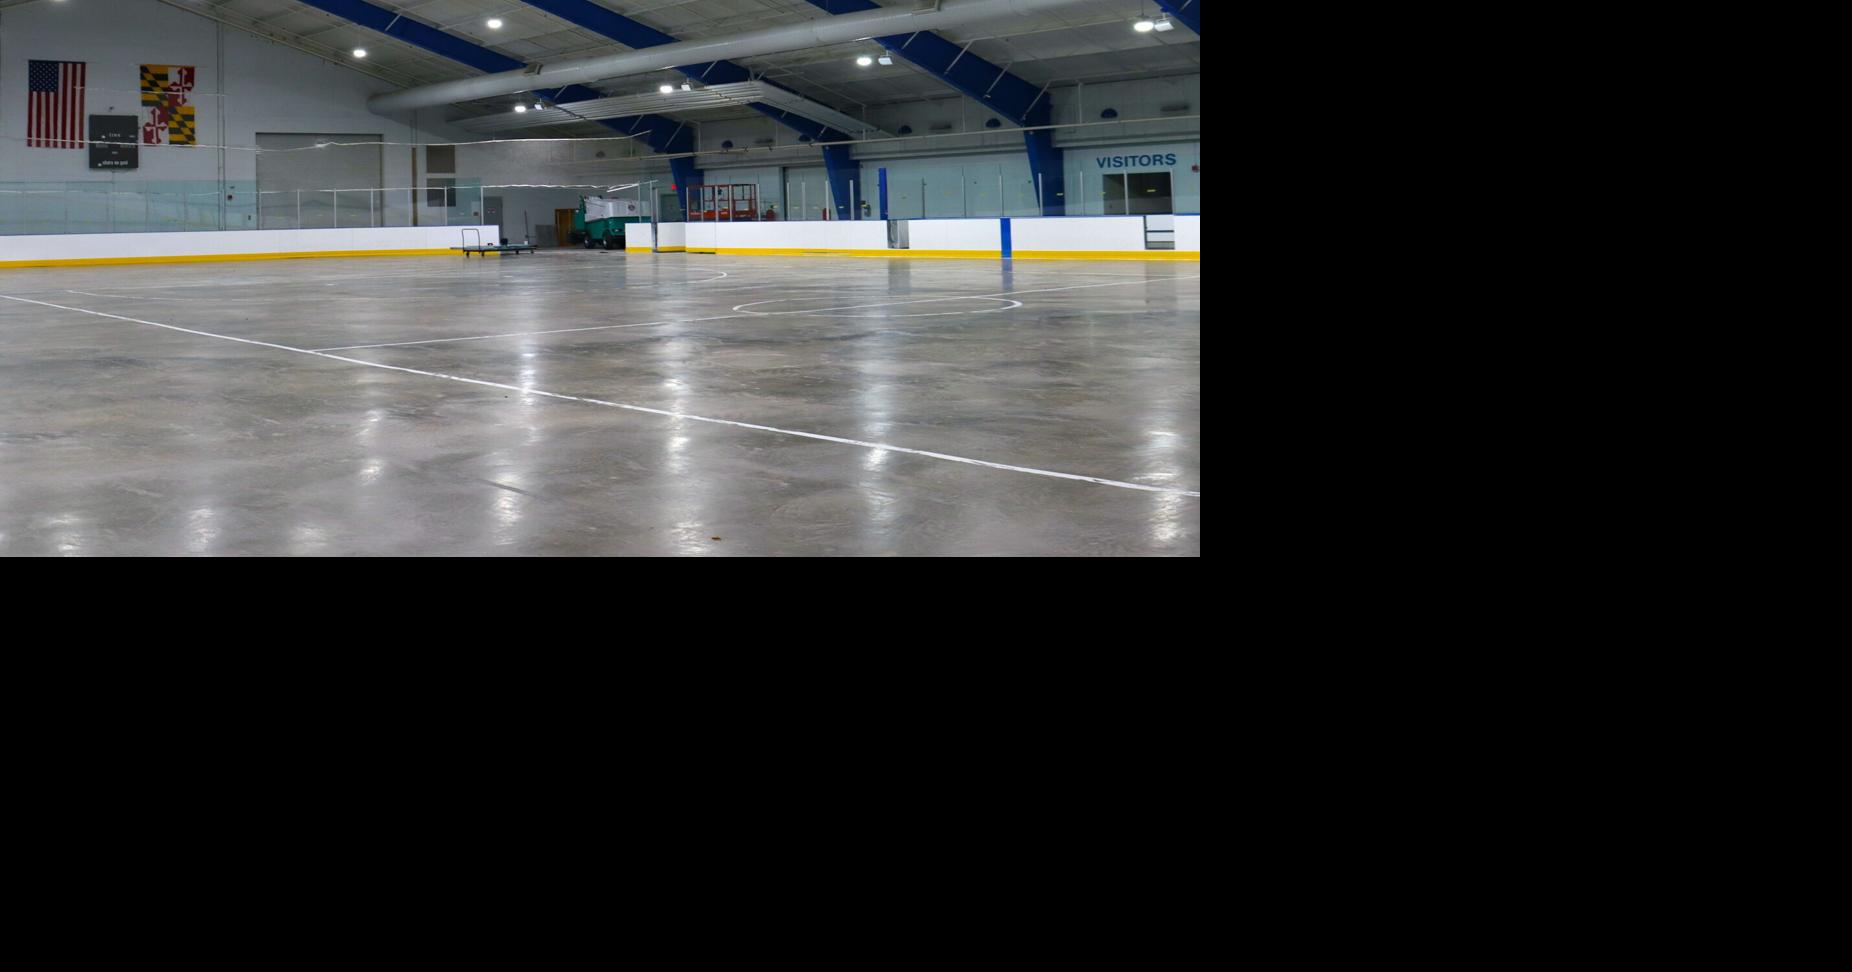 Council approves emergency bill to repair Talbot ice rink